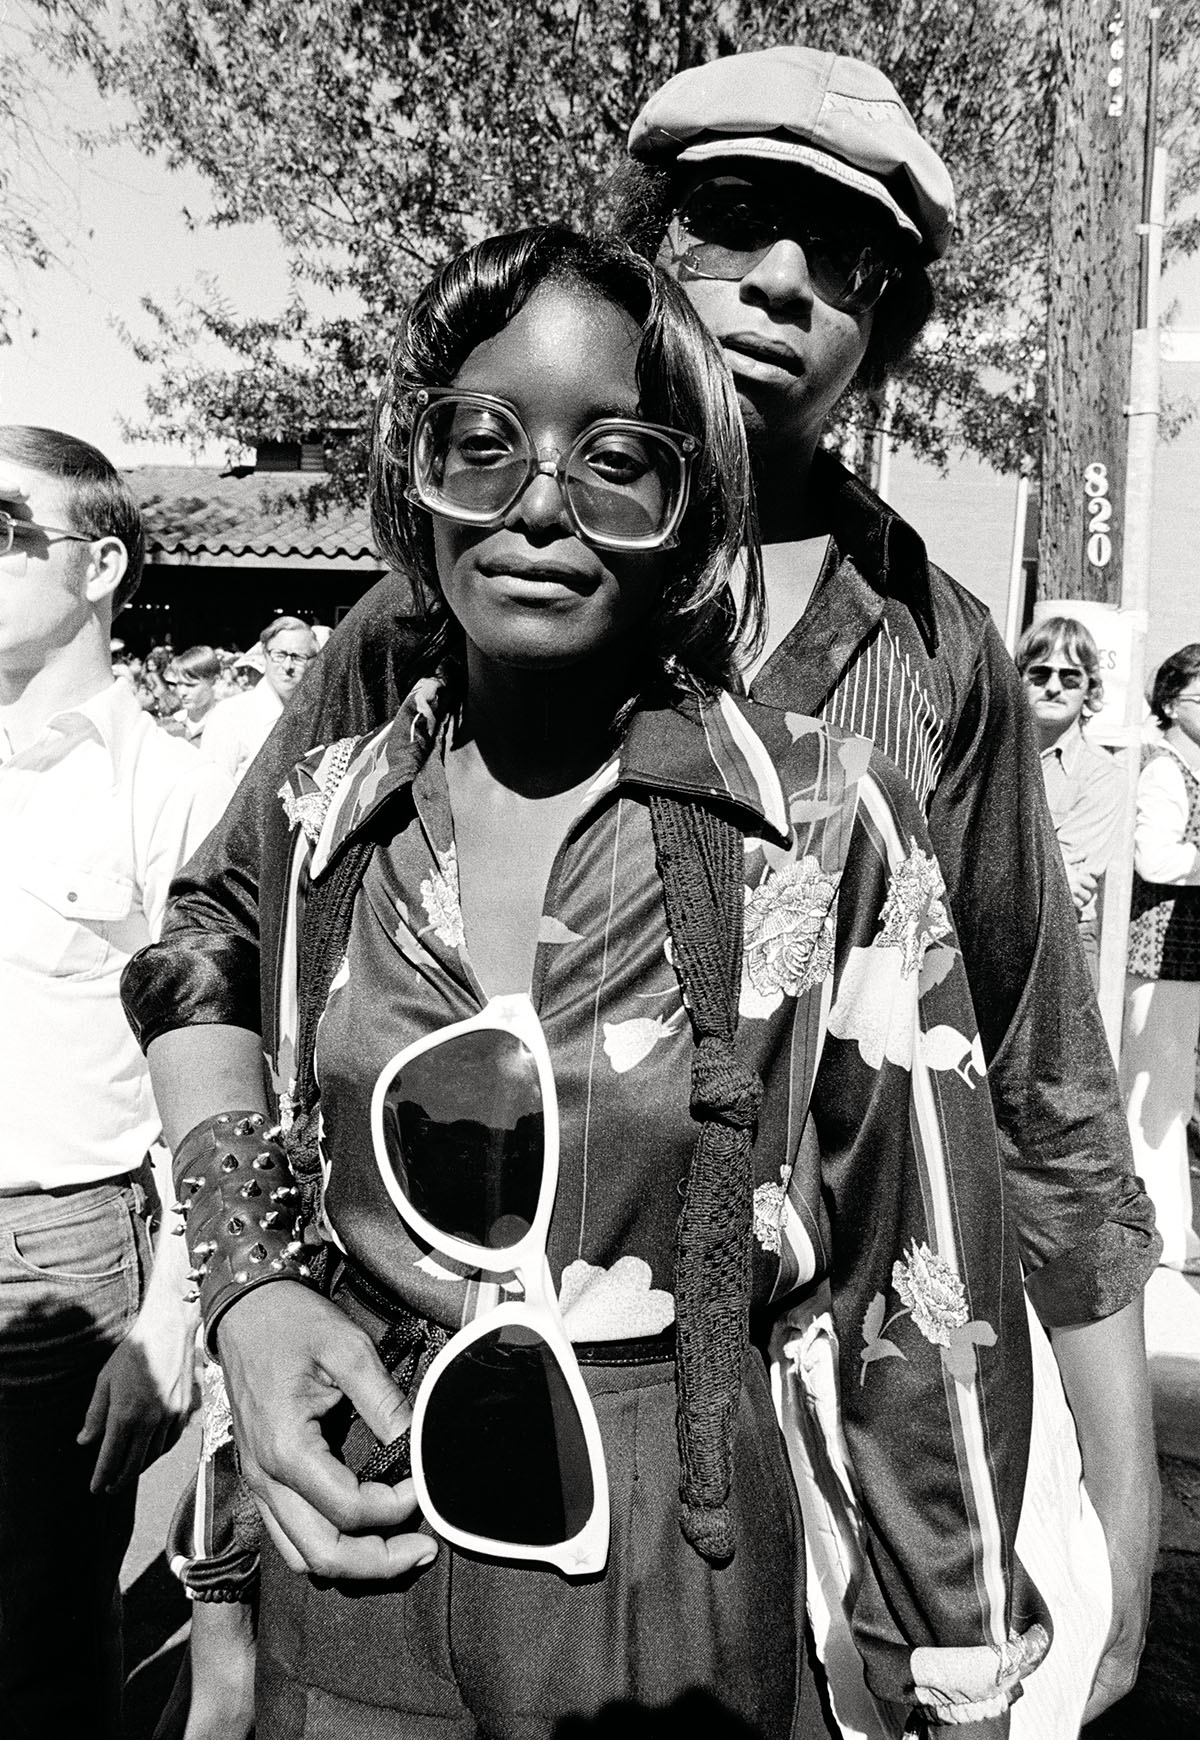 Two people dressed in typical 70s attire stand posting for the camera. The front woman wears large sunglasses around her neck